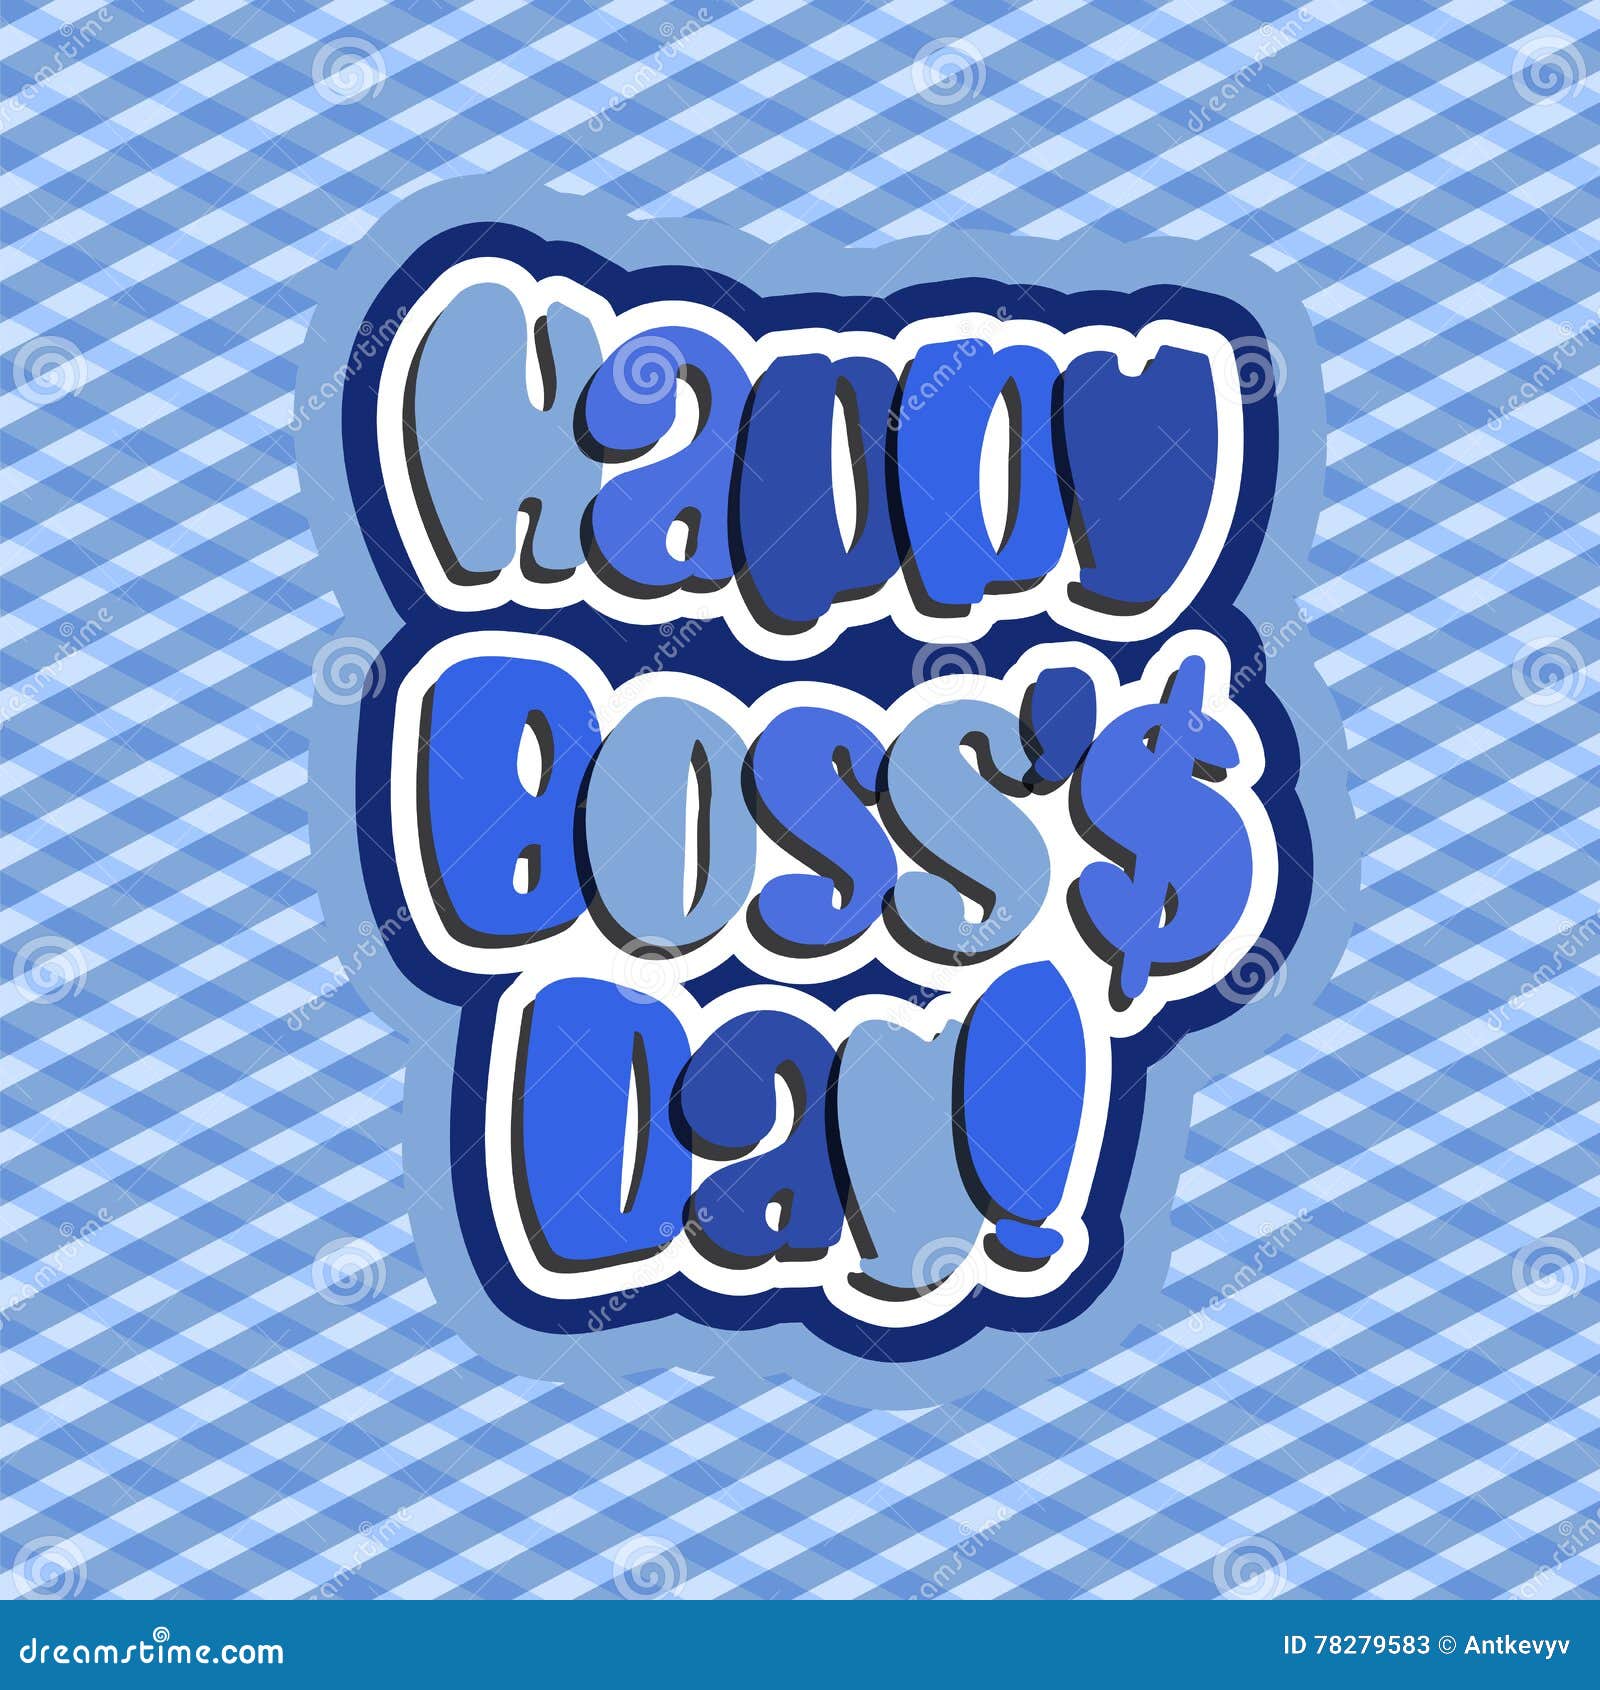 Happy Boss day stock vector. Illustration of work, card - 78279583